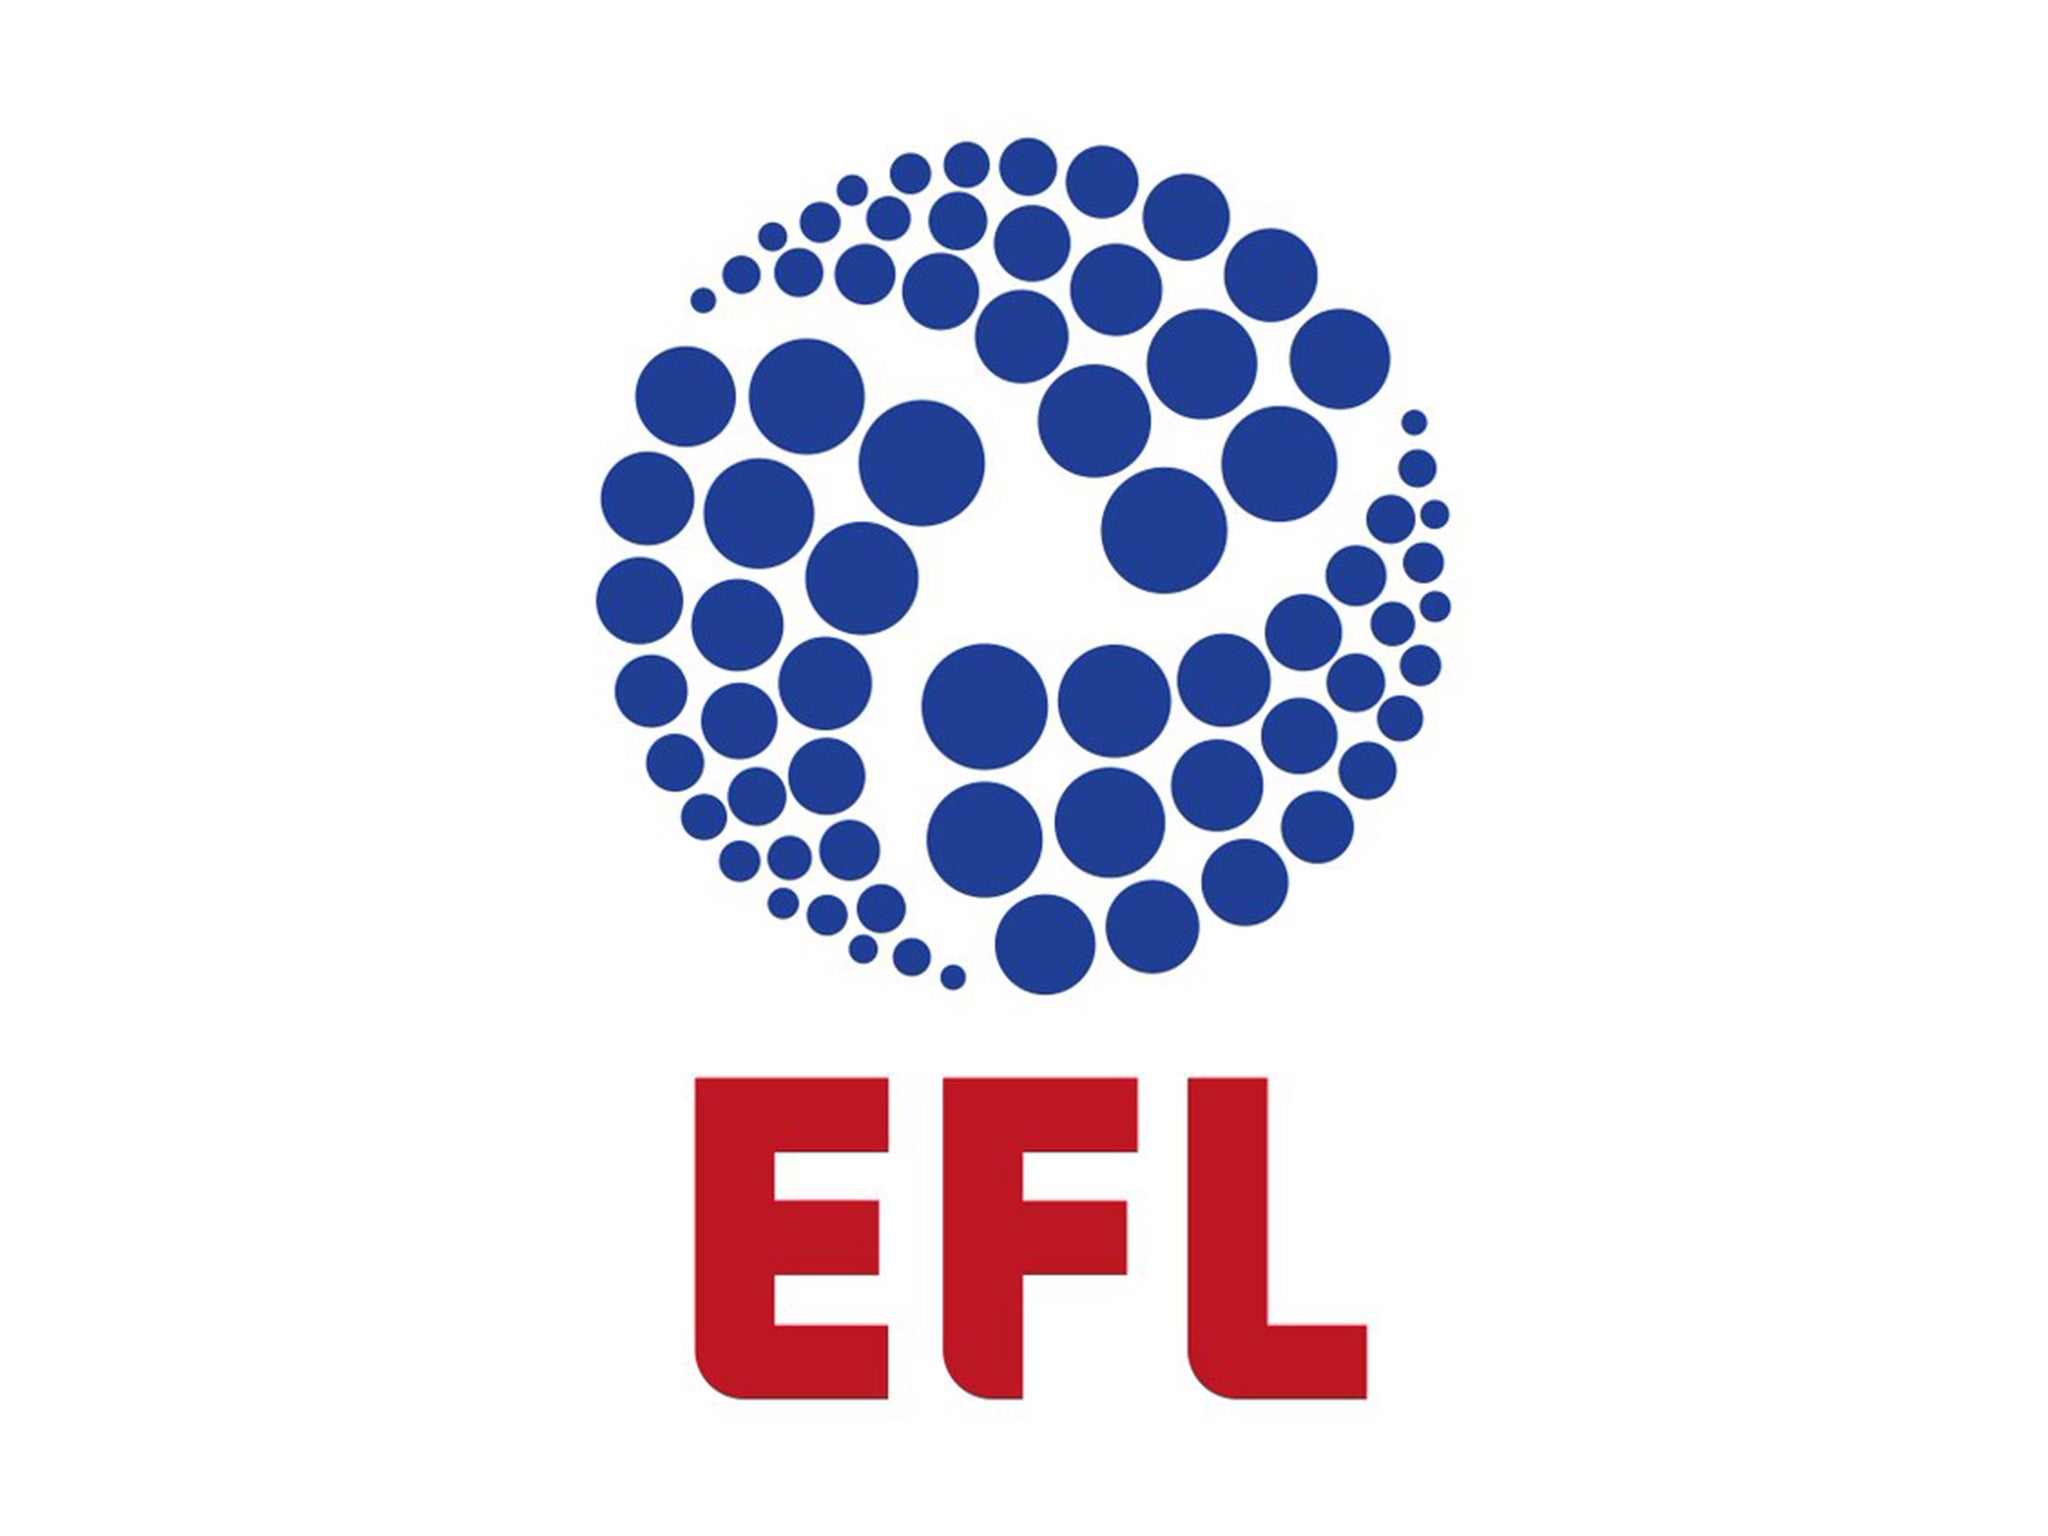 The Football League's new logo, as part of its rebranding as 'EFL'